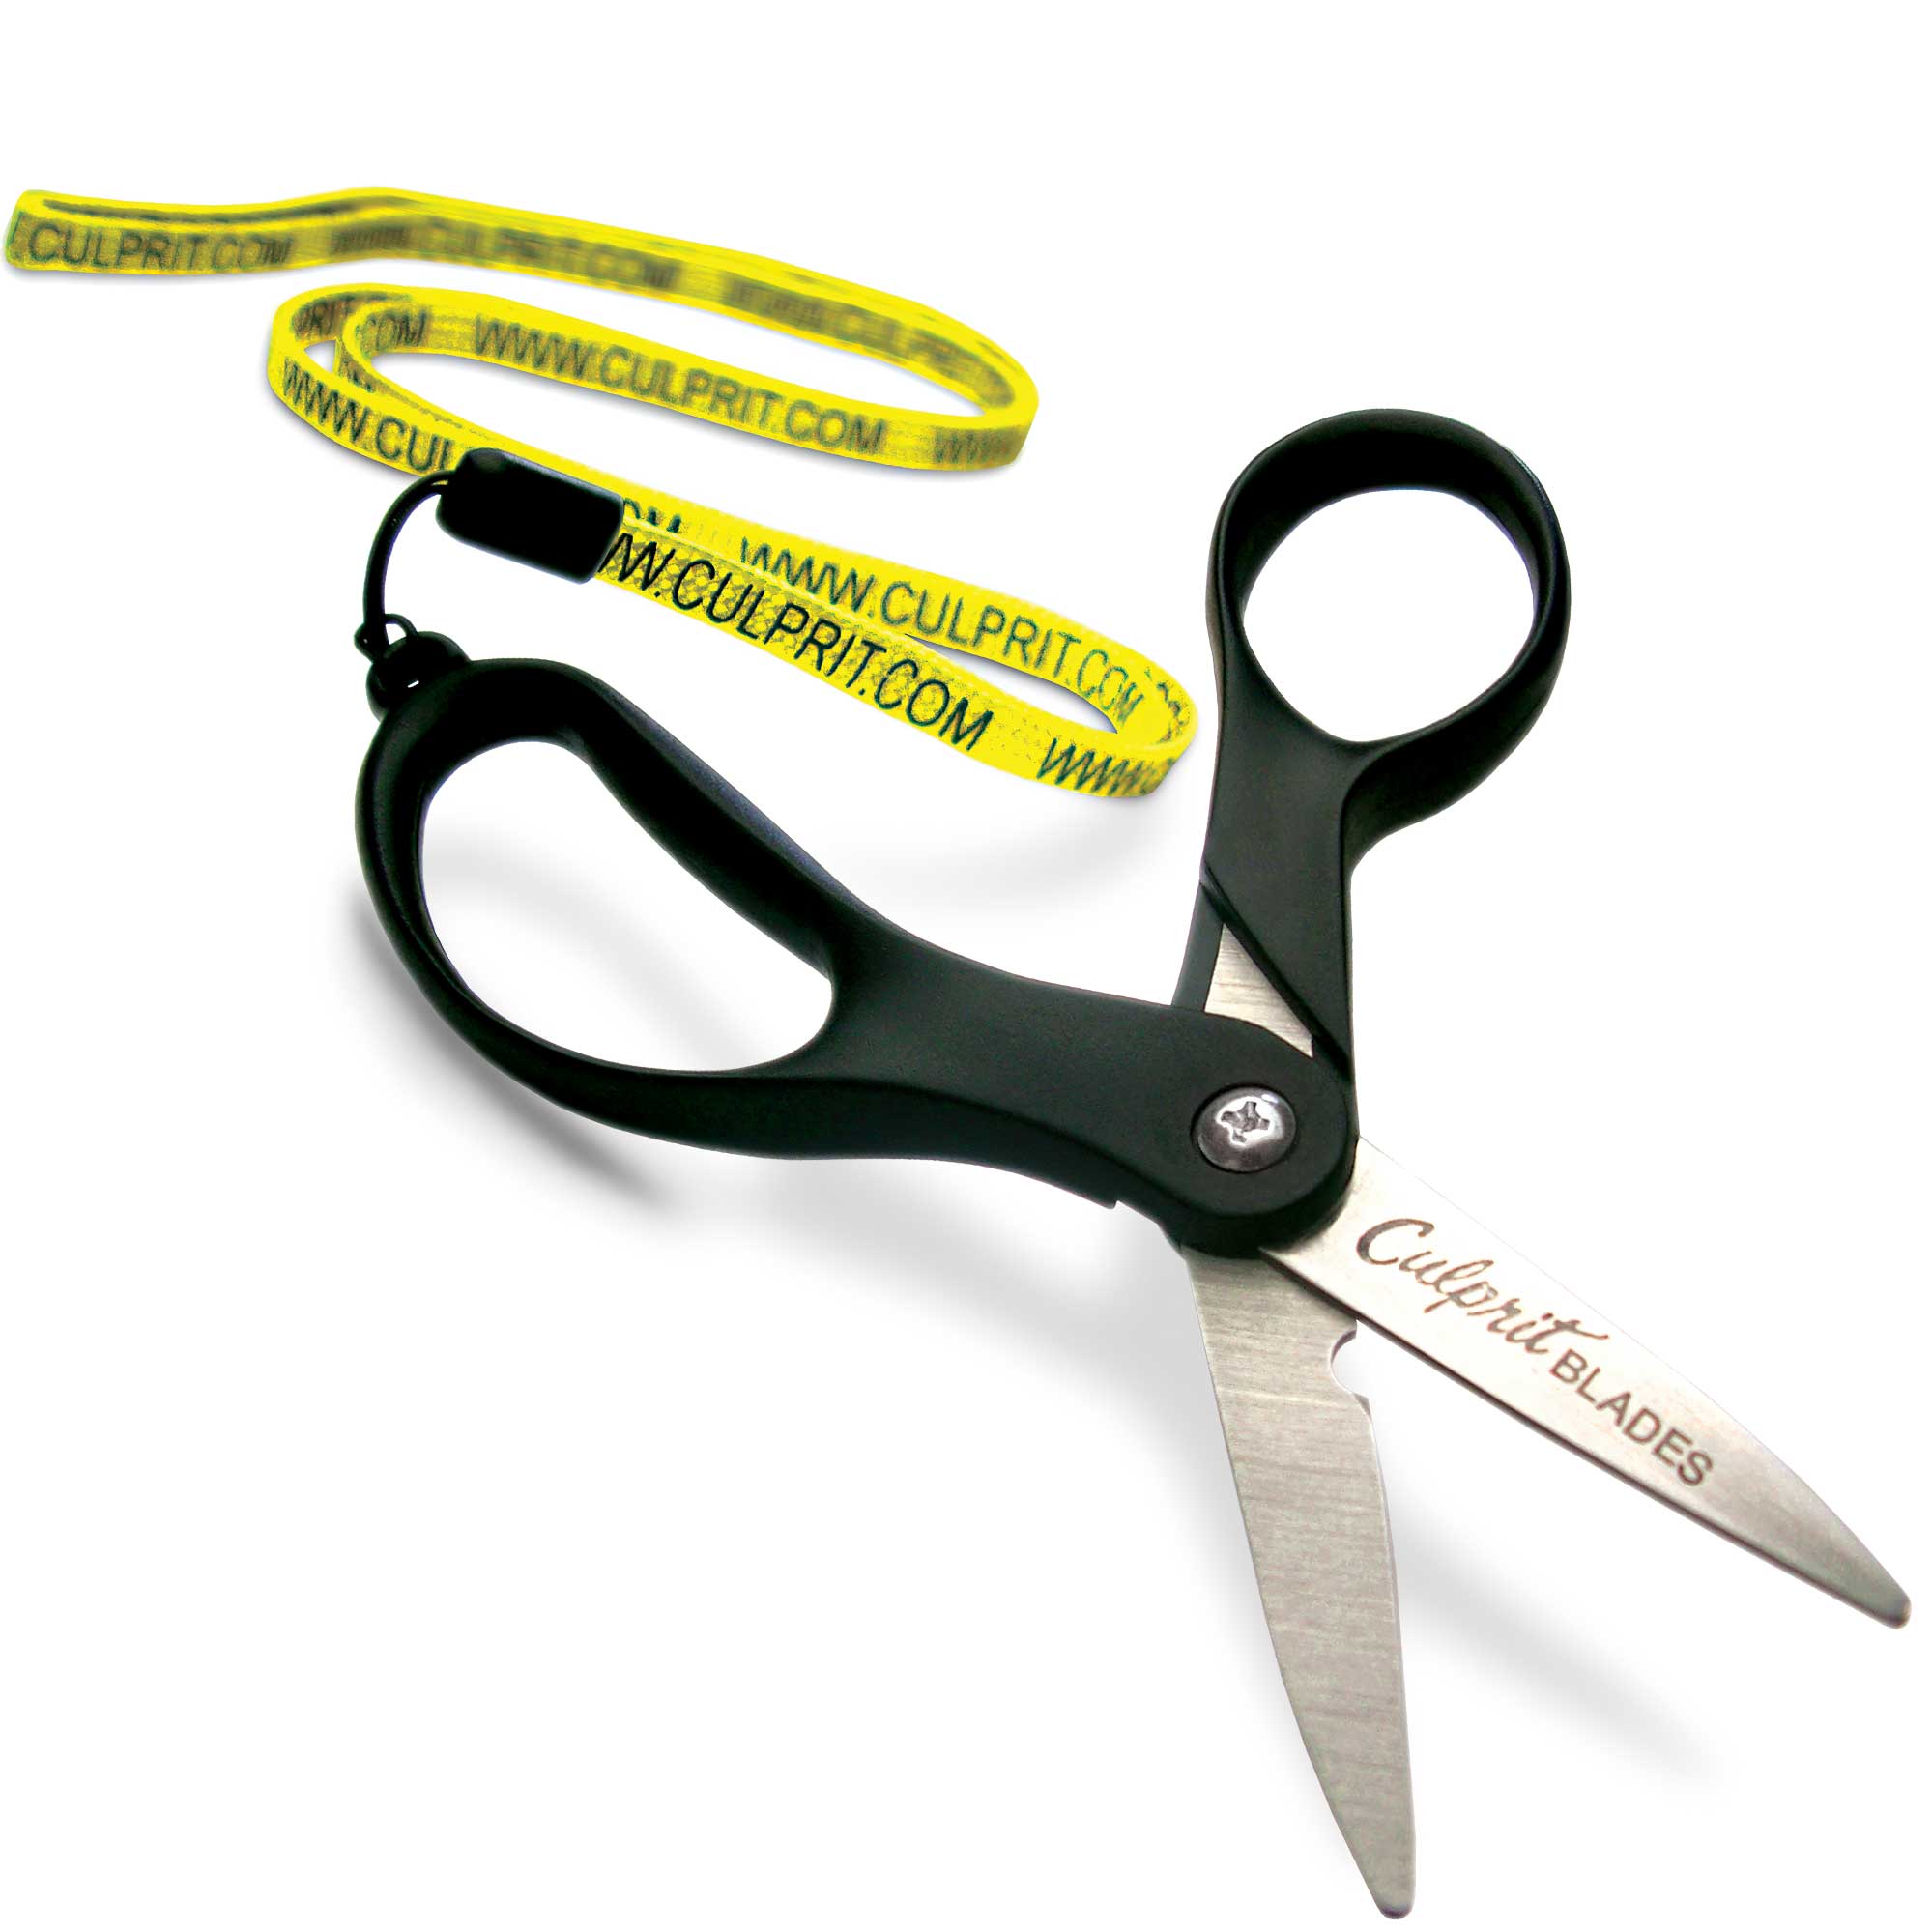 Klein A-OFS000 Fishing Braid Scissors - Precision Cuts for Anglers